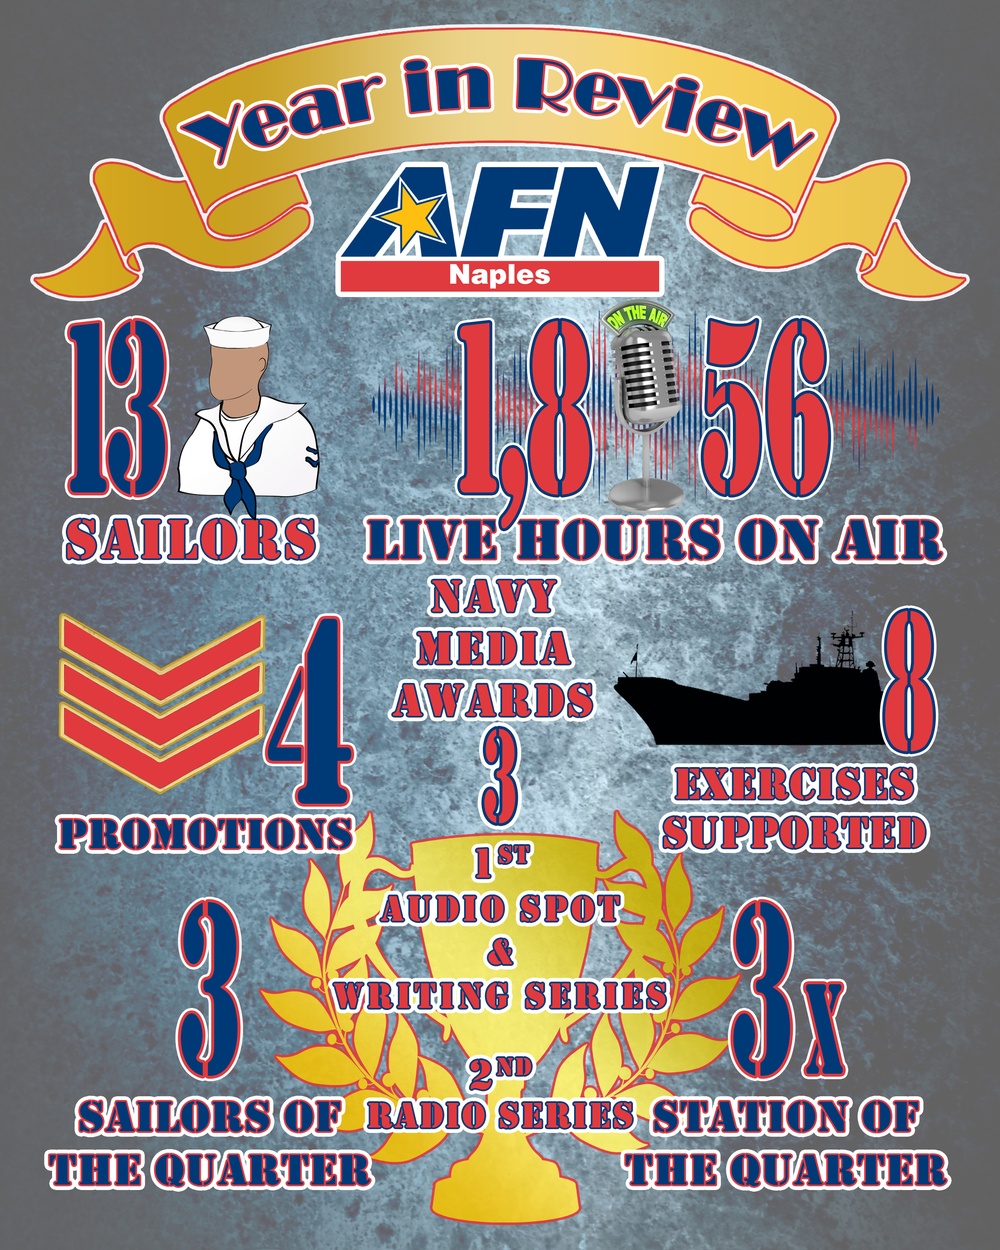 AFN Naples Year in Review